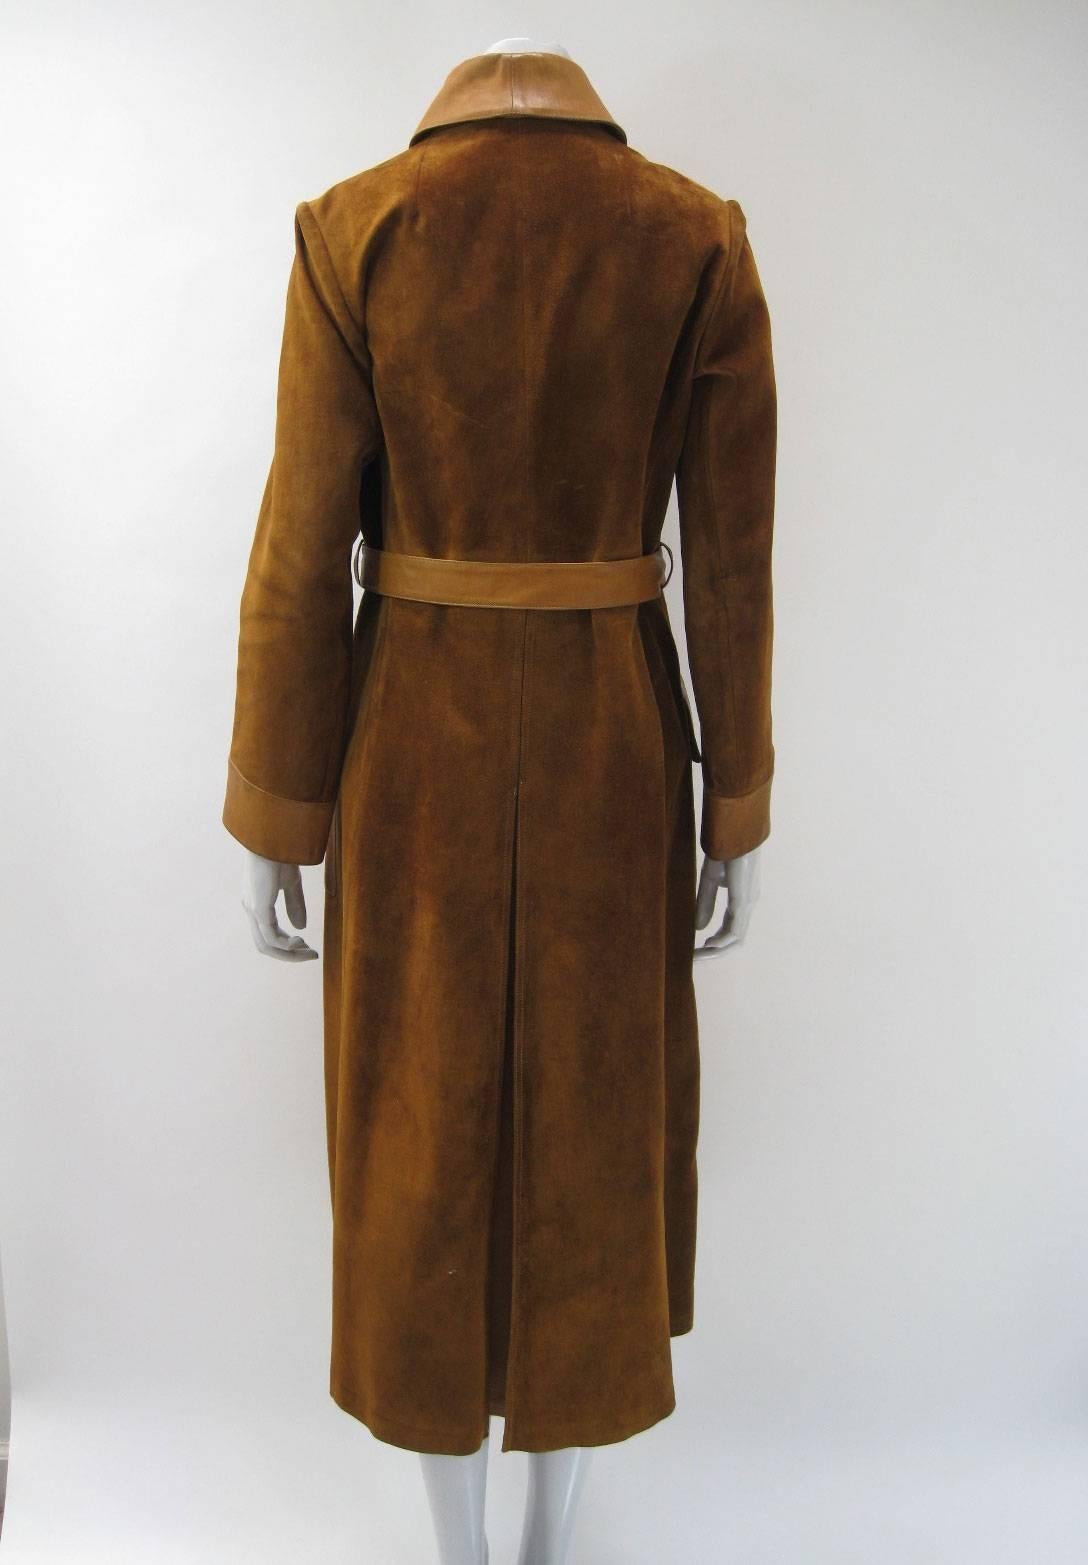 Vintage 1970s Gucci Tan Suede Leather Trim Coat with Tiger Hardware  1